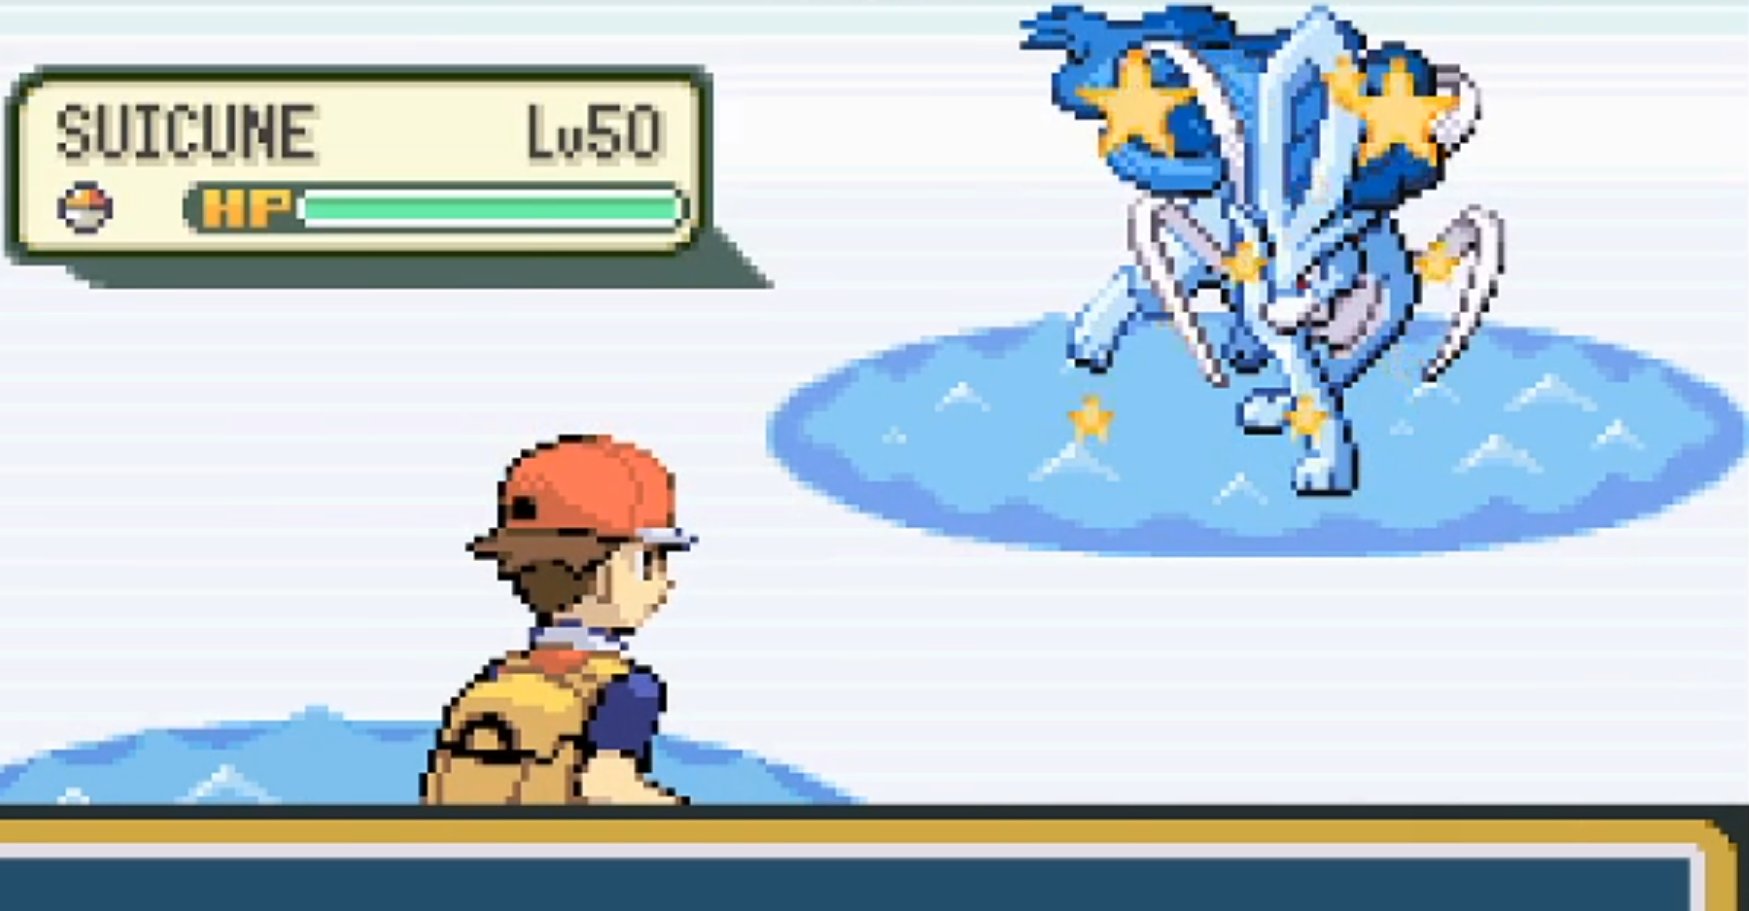 HangarOfRoam 🍵 on Twitter: "SHINY SUICUNE roamed! All 8 of the Gen II &amp; III roamers completed in under 8 single-hunted. Reaction: https://t.co/8B3MT2OJBj More method videos are on the way for